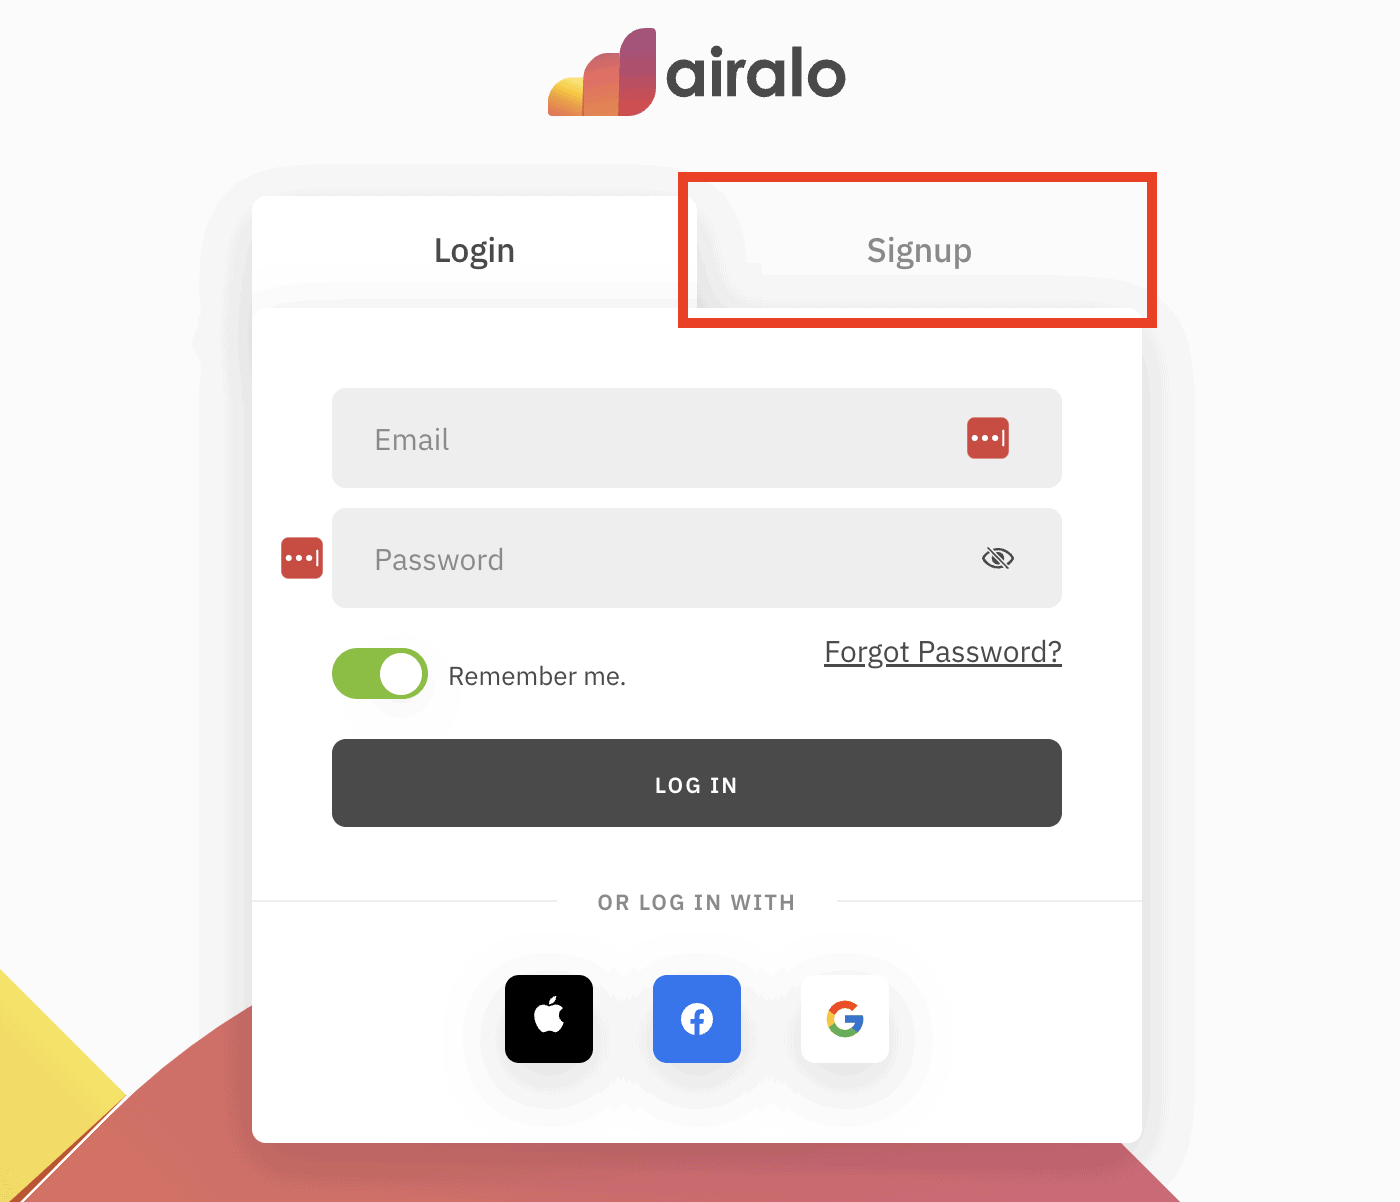 sign up for an airalo account